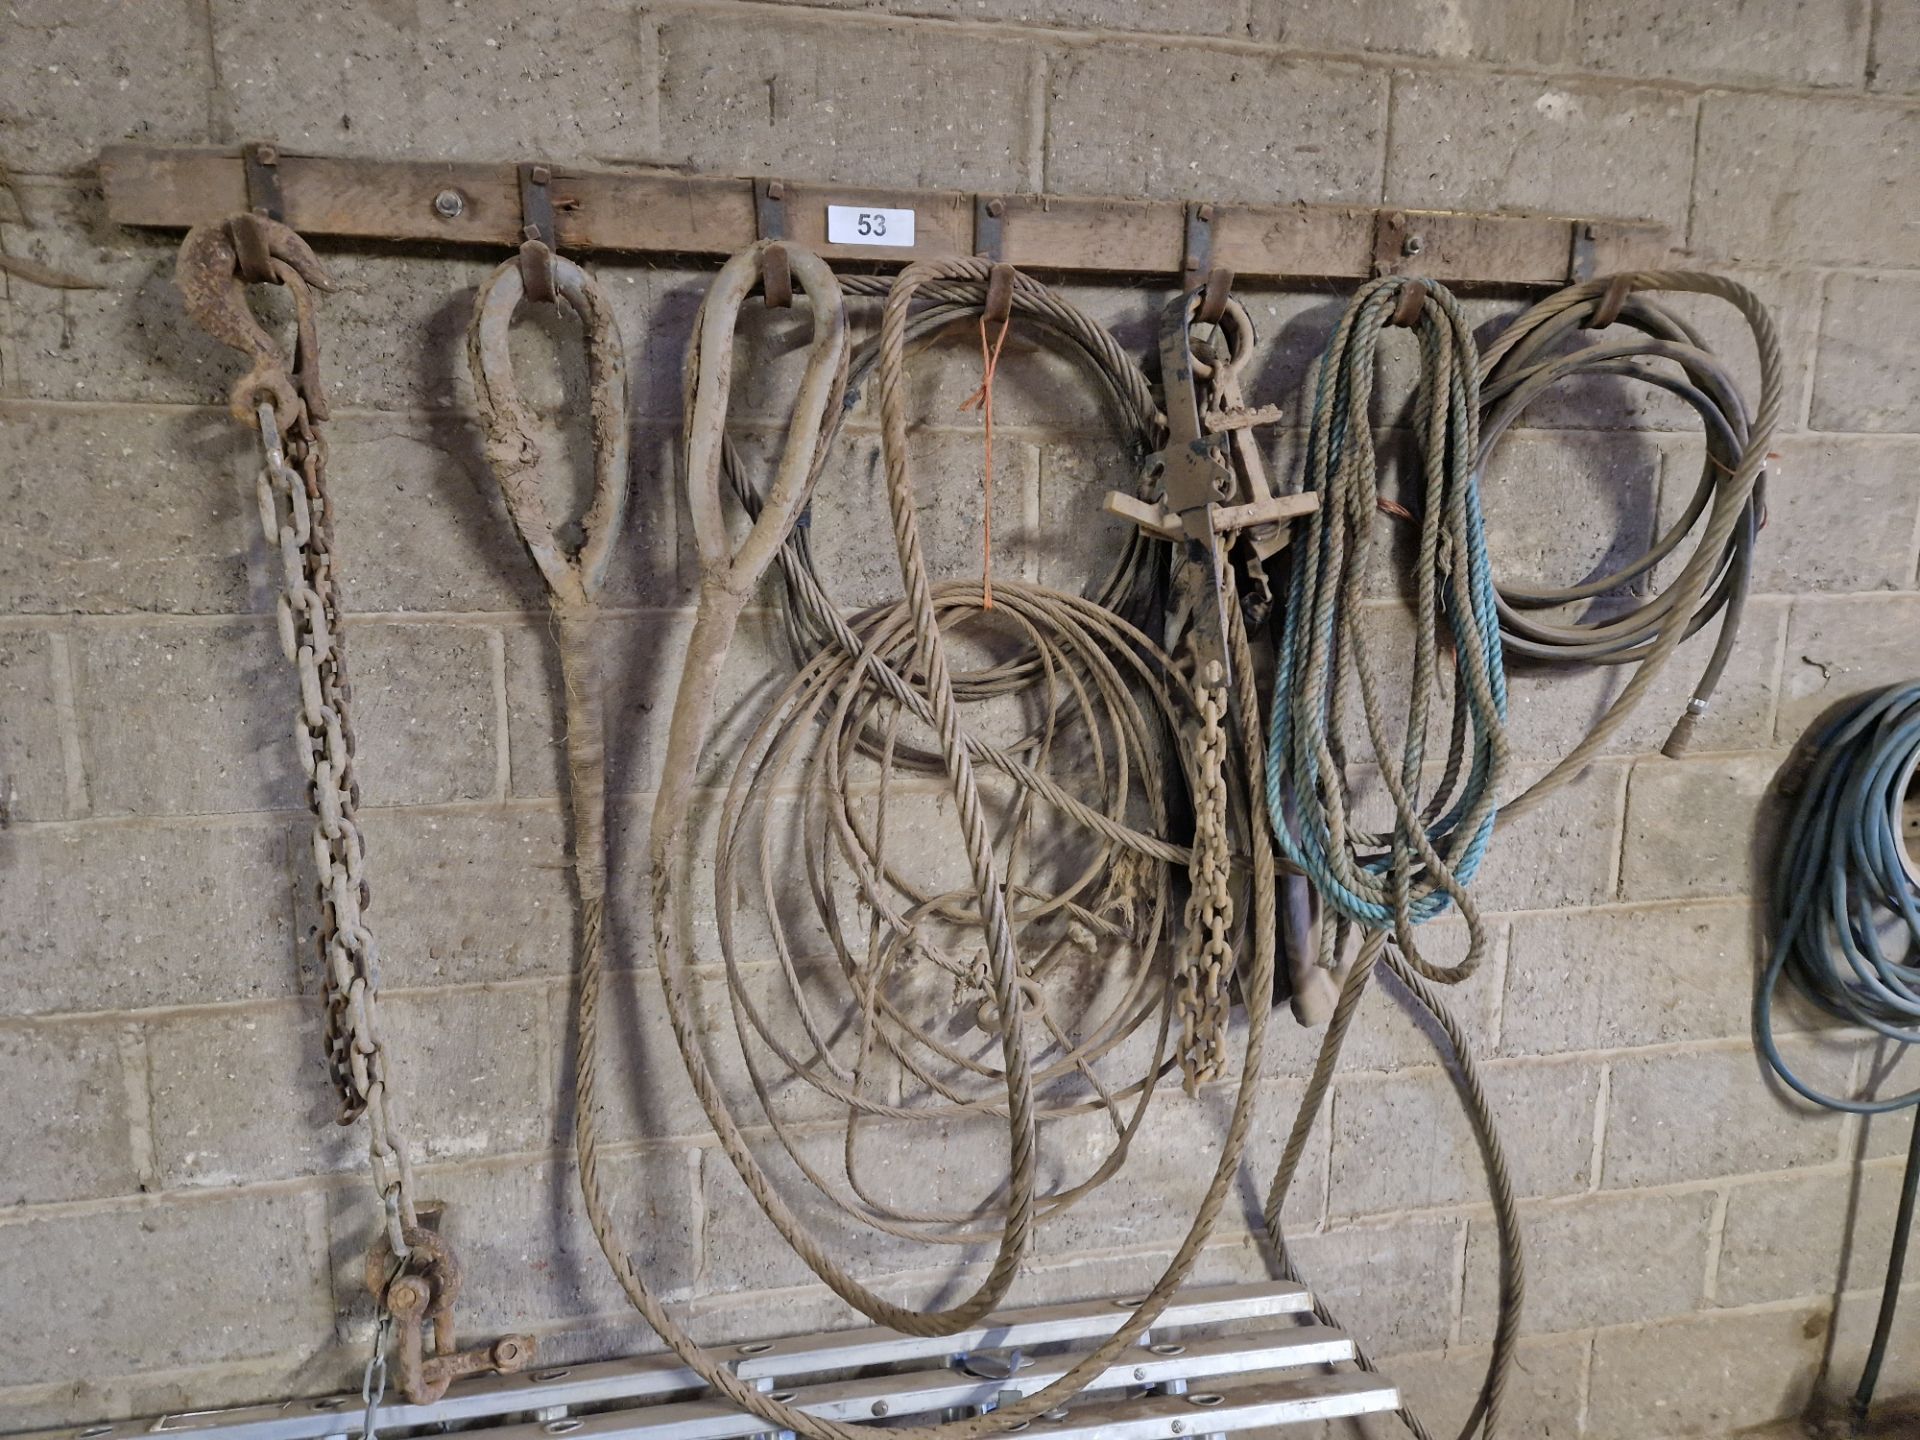 Rack of chains & wire rope